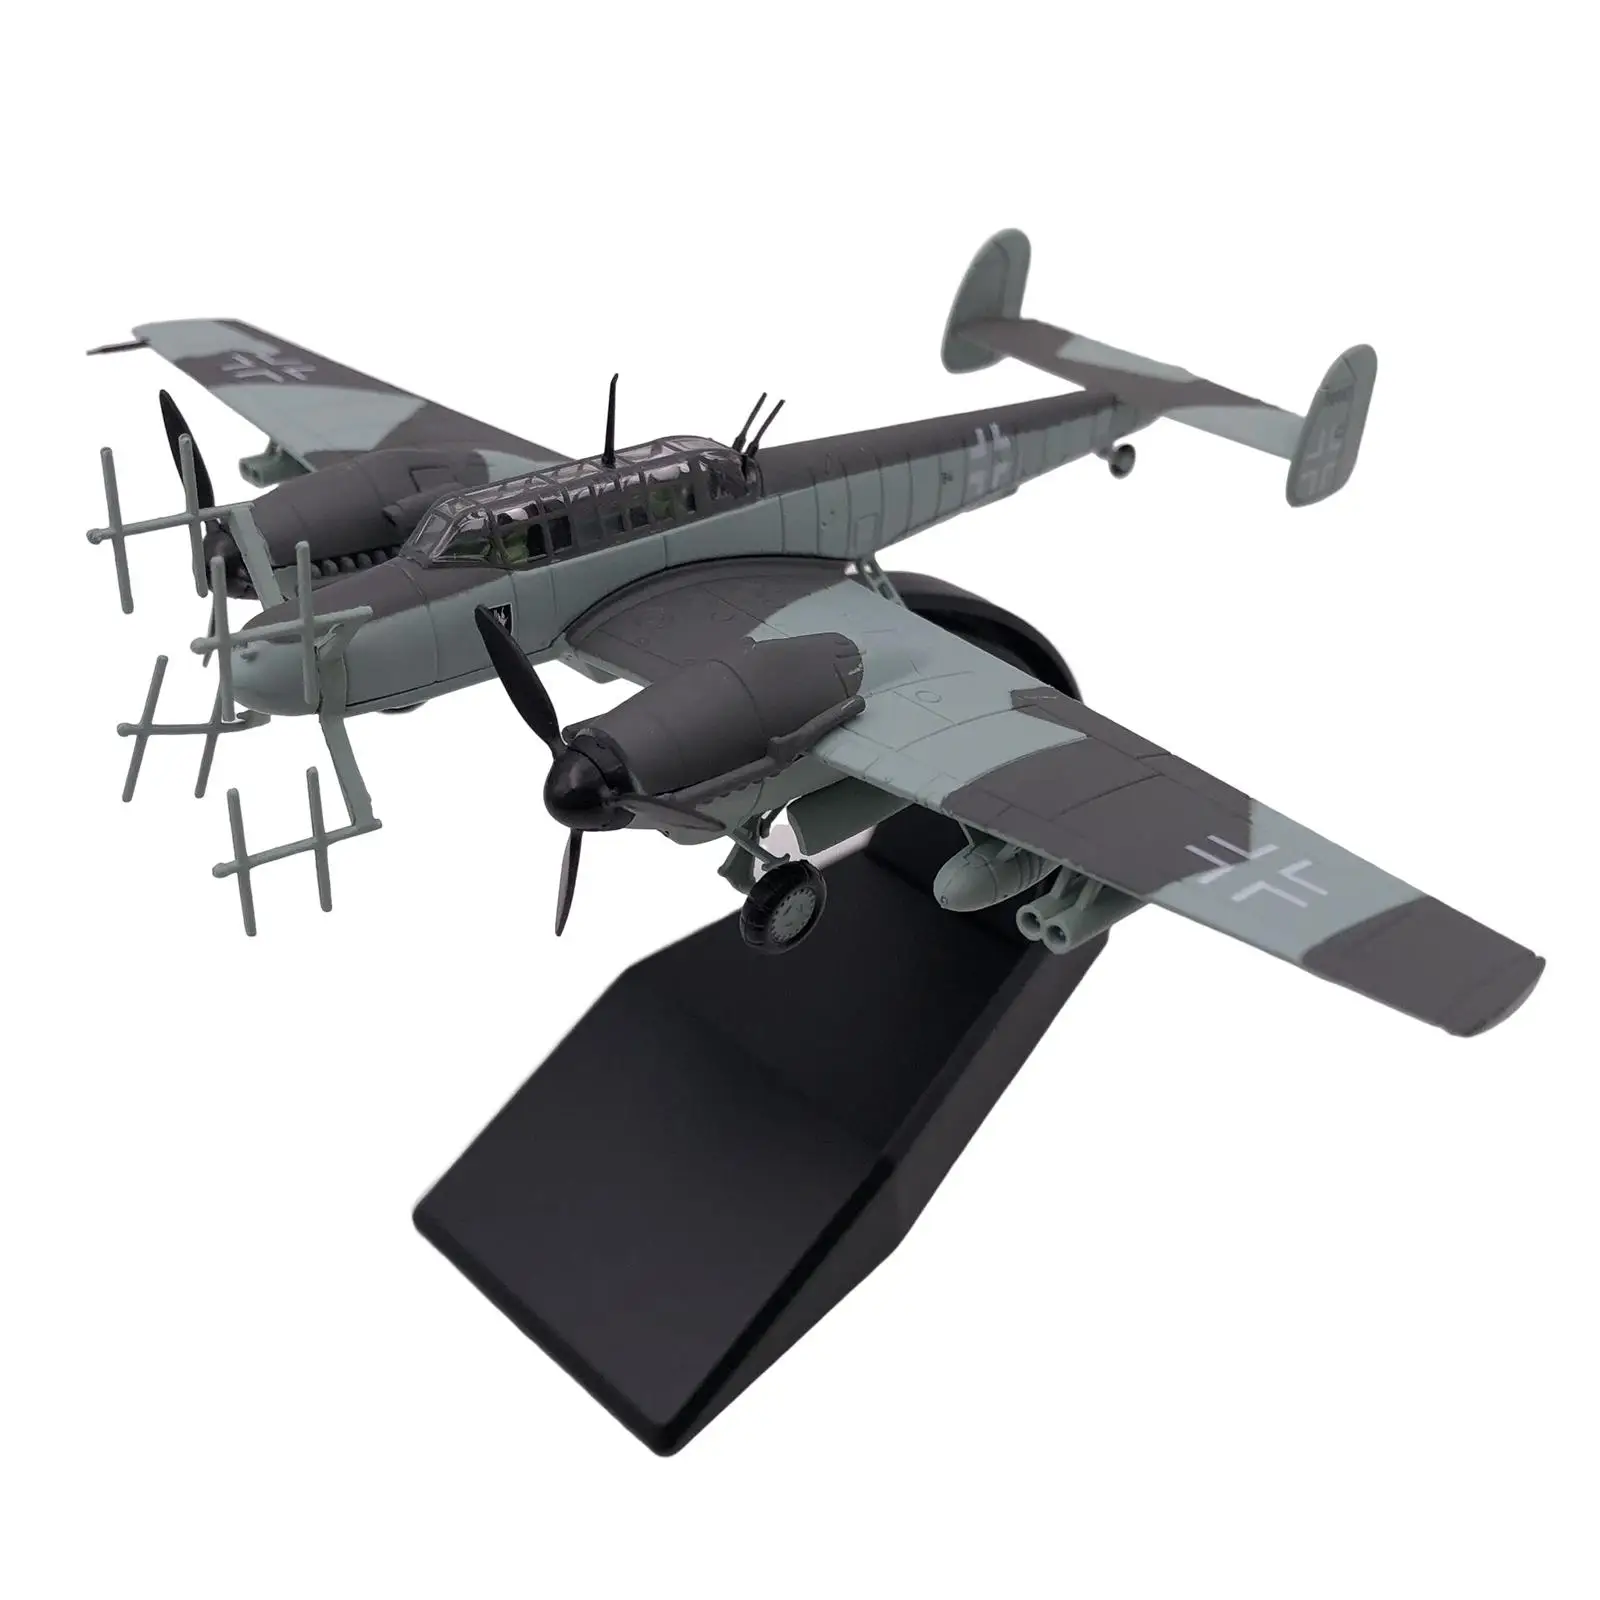 1/100 Scale BF-110 Fighter Model with Stand Living Room Decorations Gift